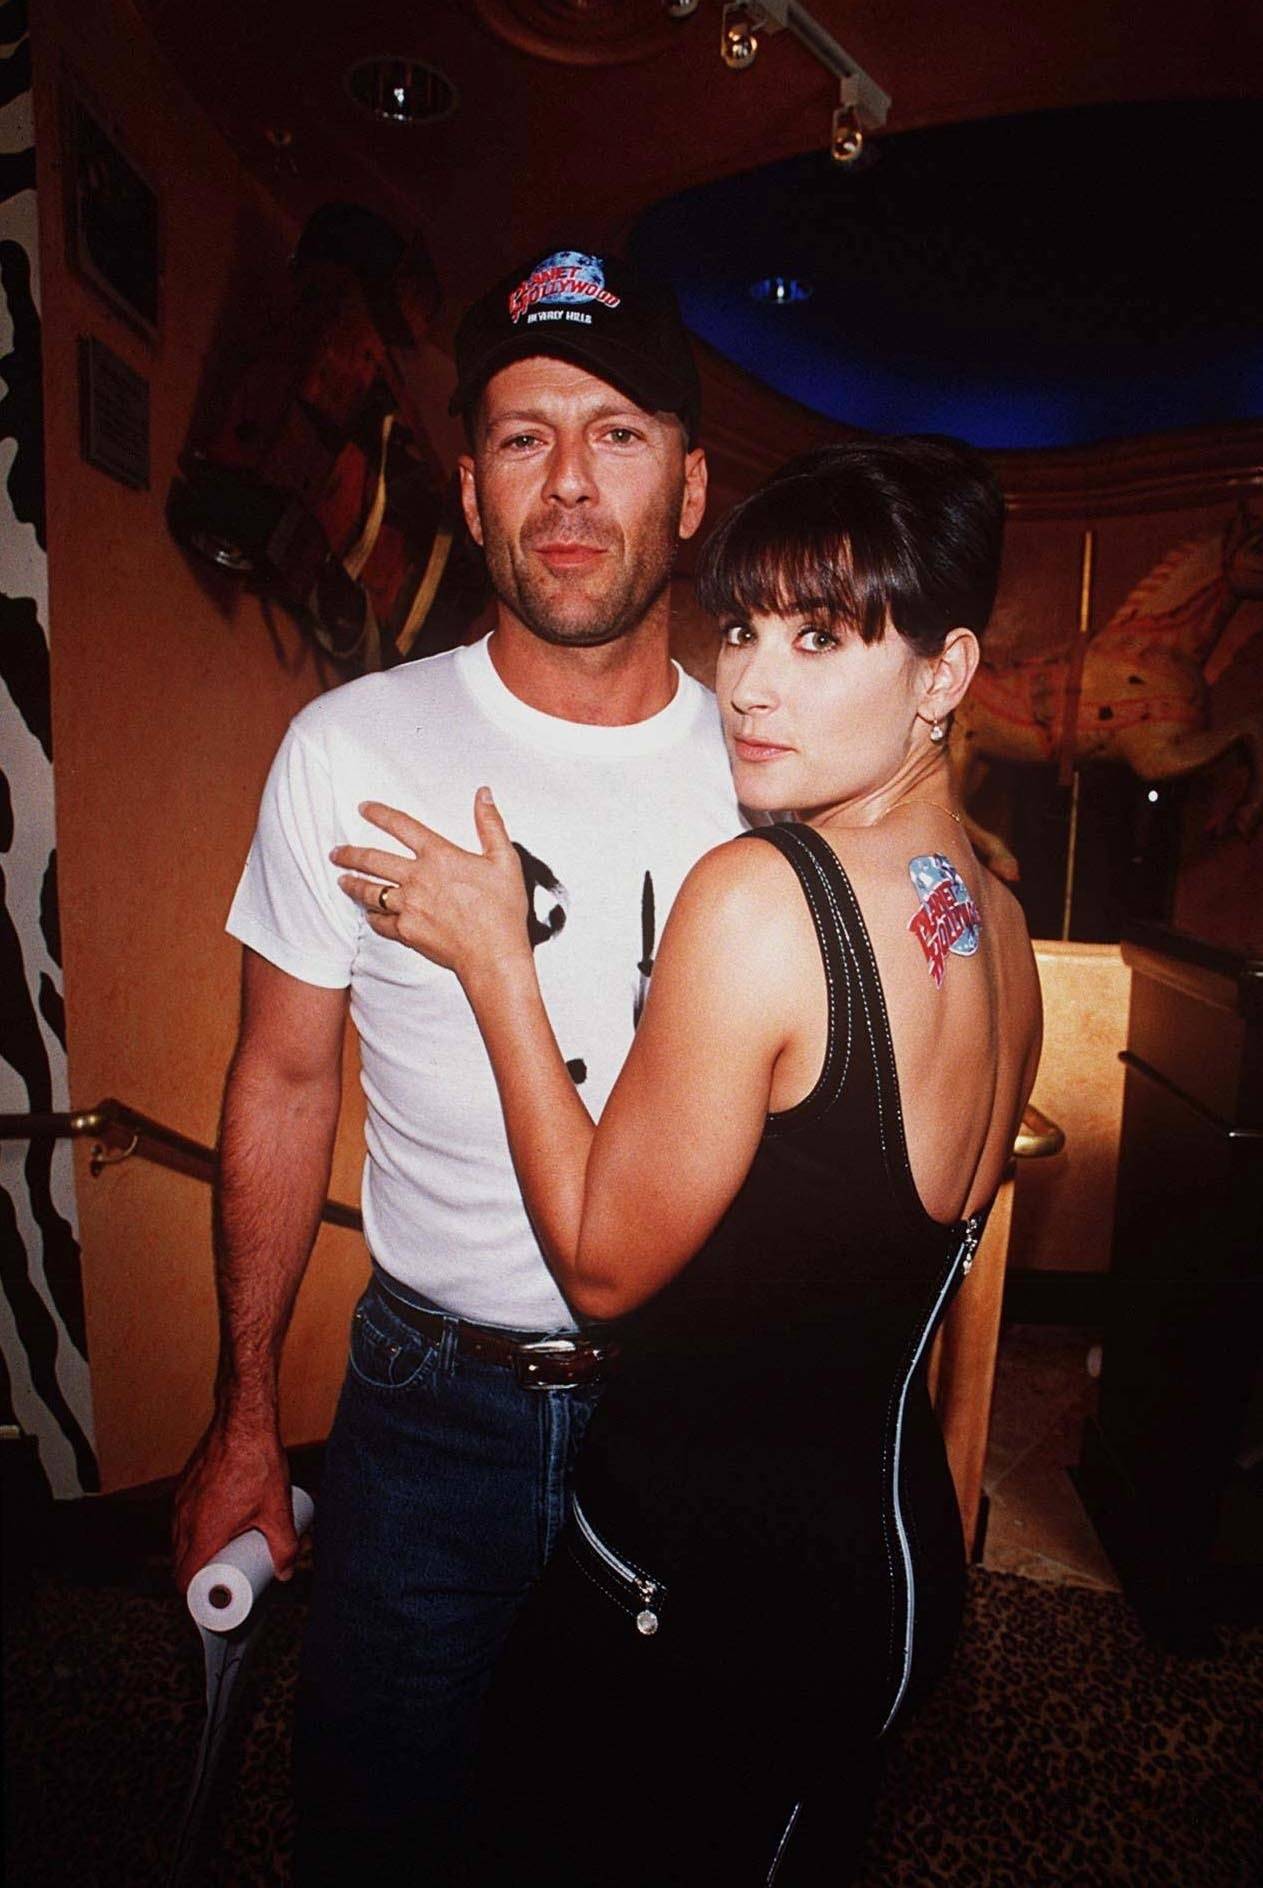 BRUCE WILLIS AND DEMI MOORE AT PLANET HOLLYWOOD RESTAURANT, LOS ANGELES, AMERICA - 1995